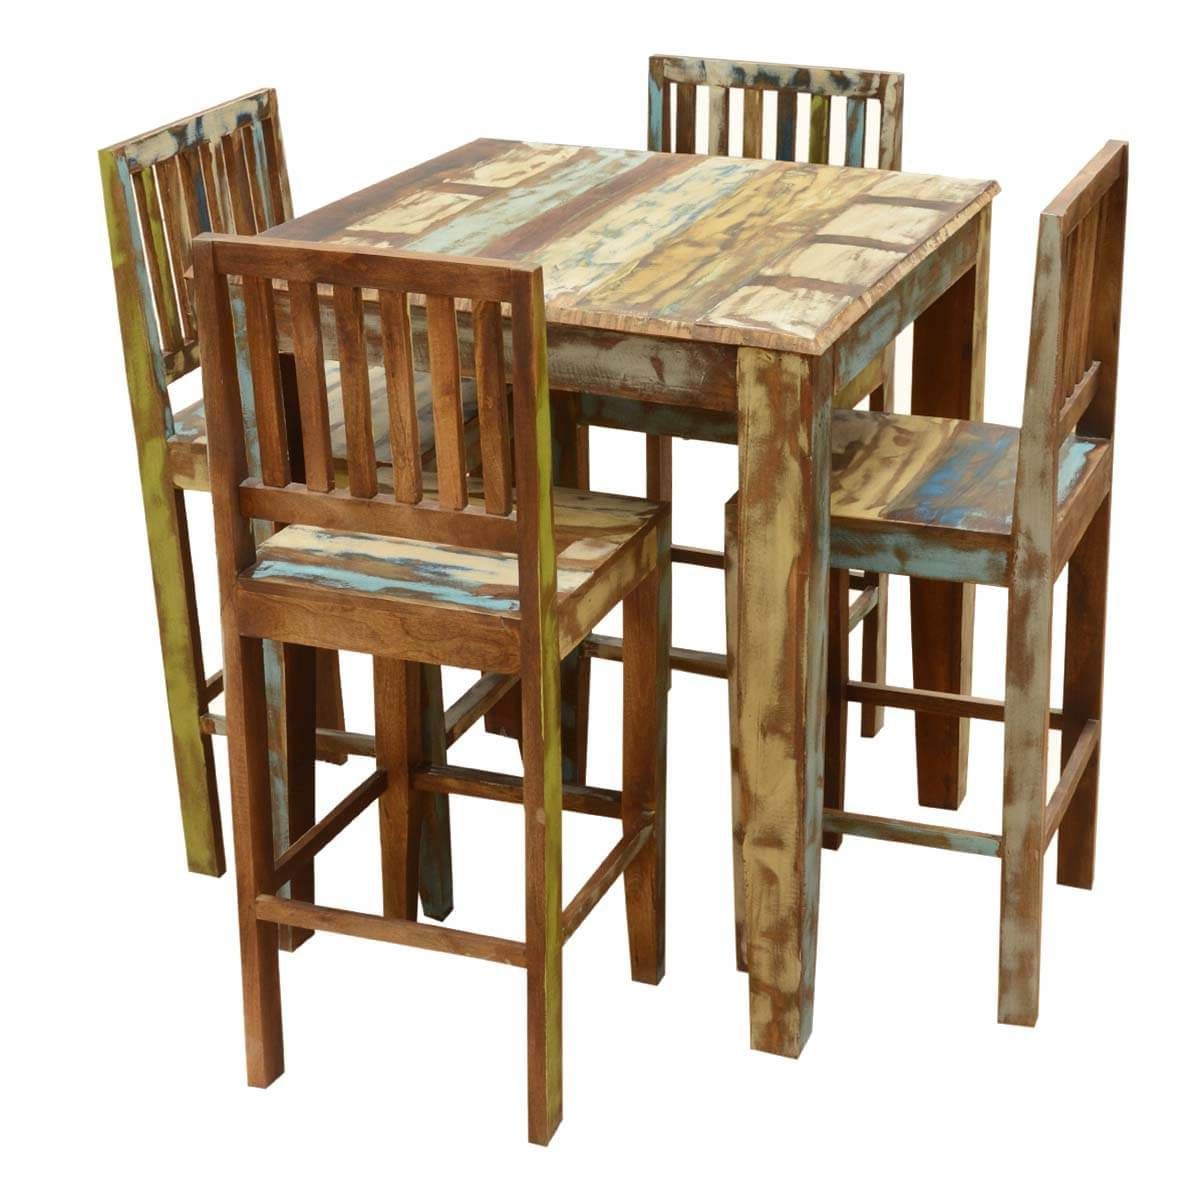 Popular Reclaimed Wood Outdoor Tables Pertaining To Appalachian Rustic Reclaimed Wood High Bar Table & Chair Set (View 14 of 15)